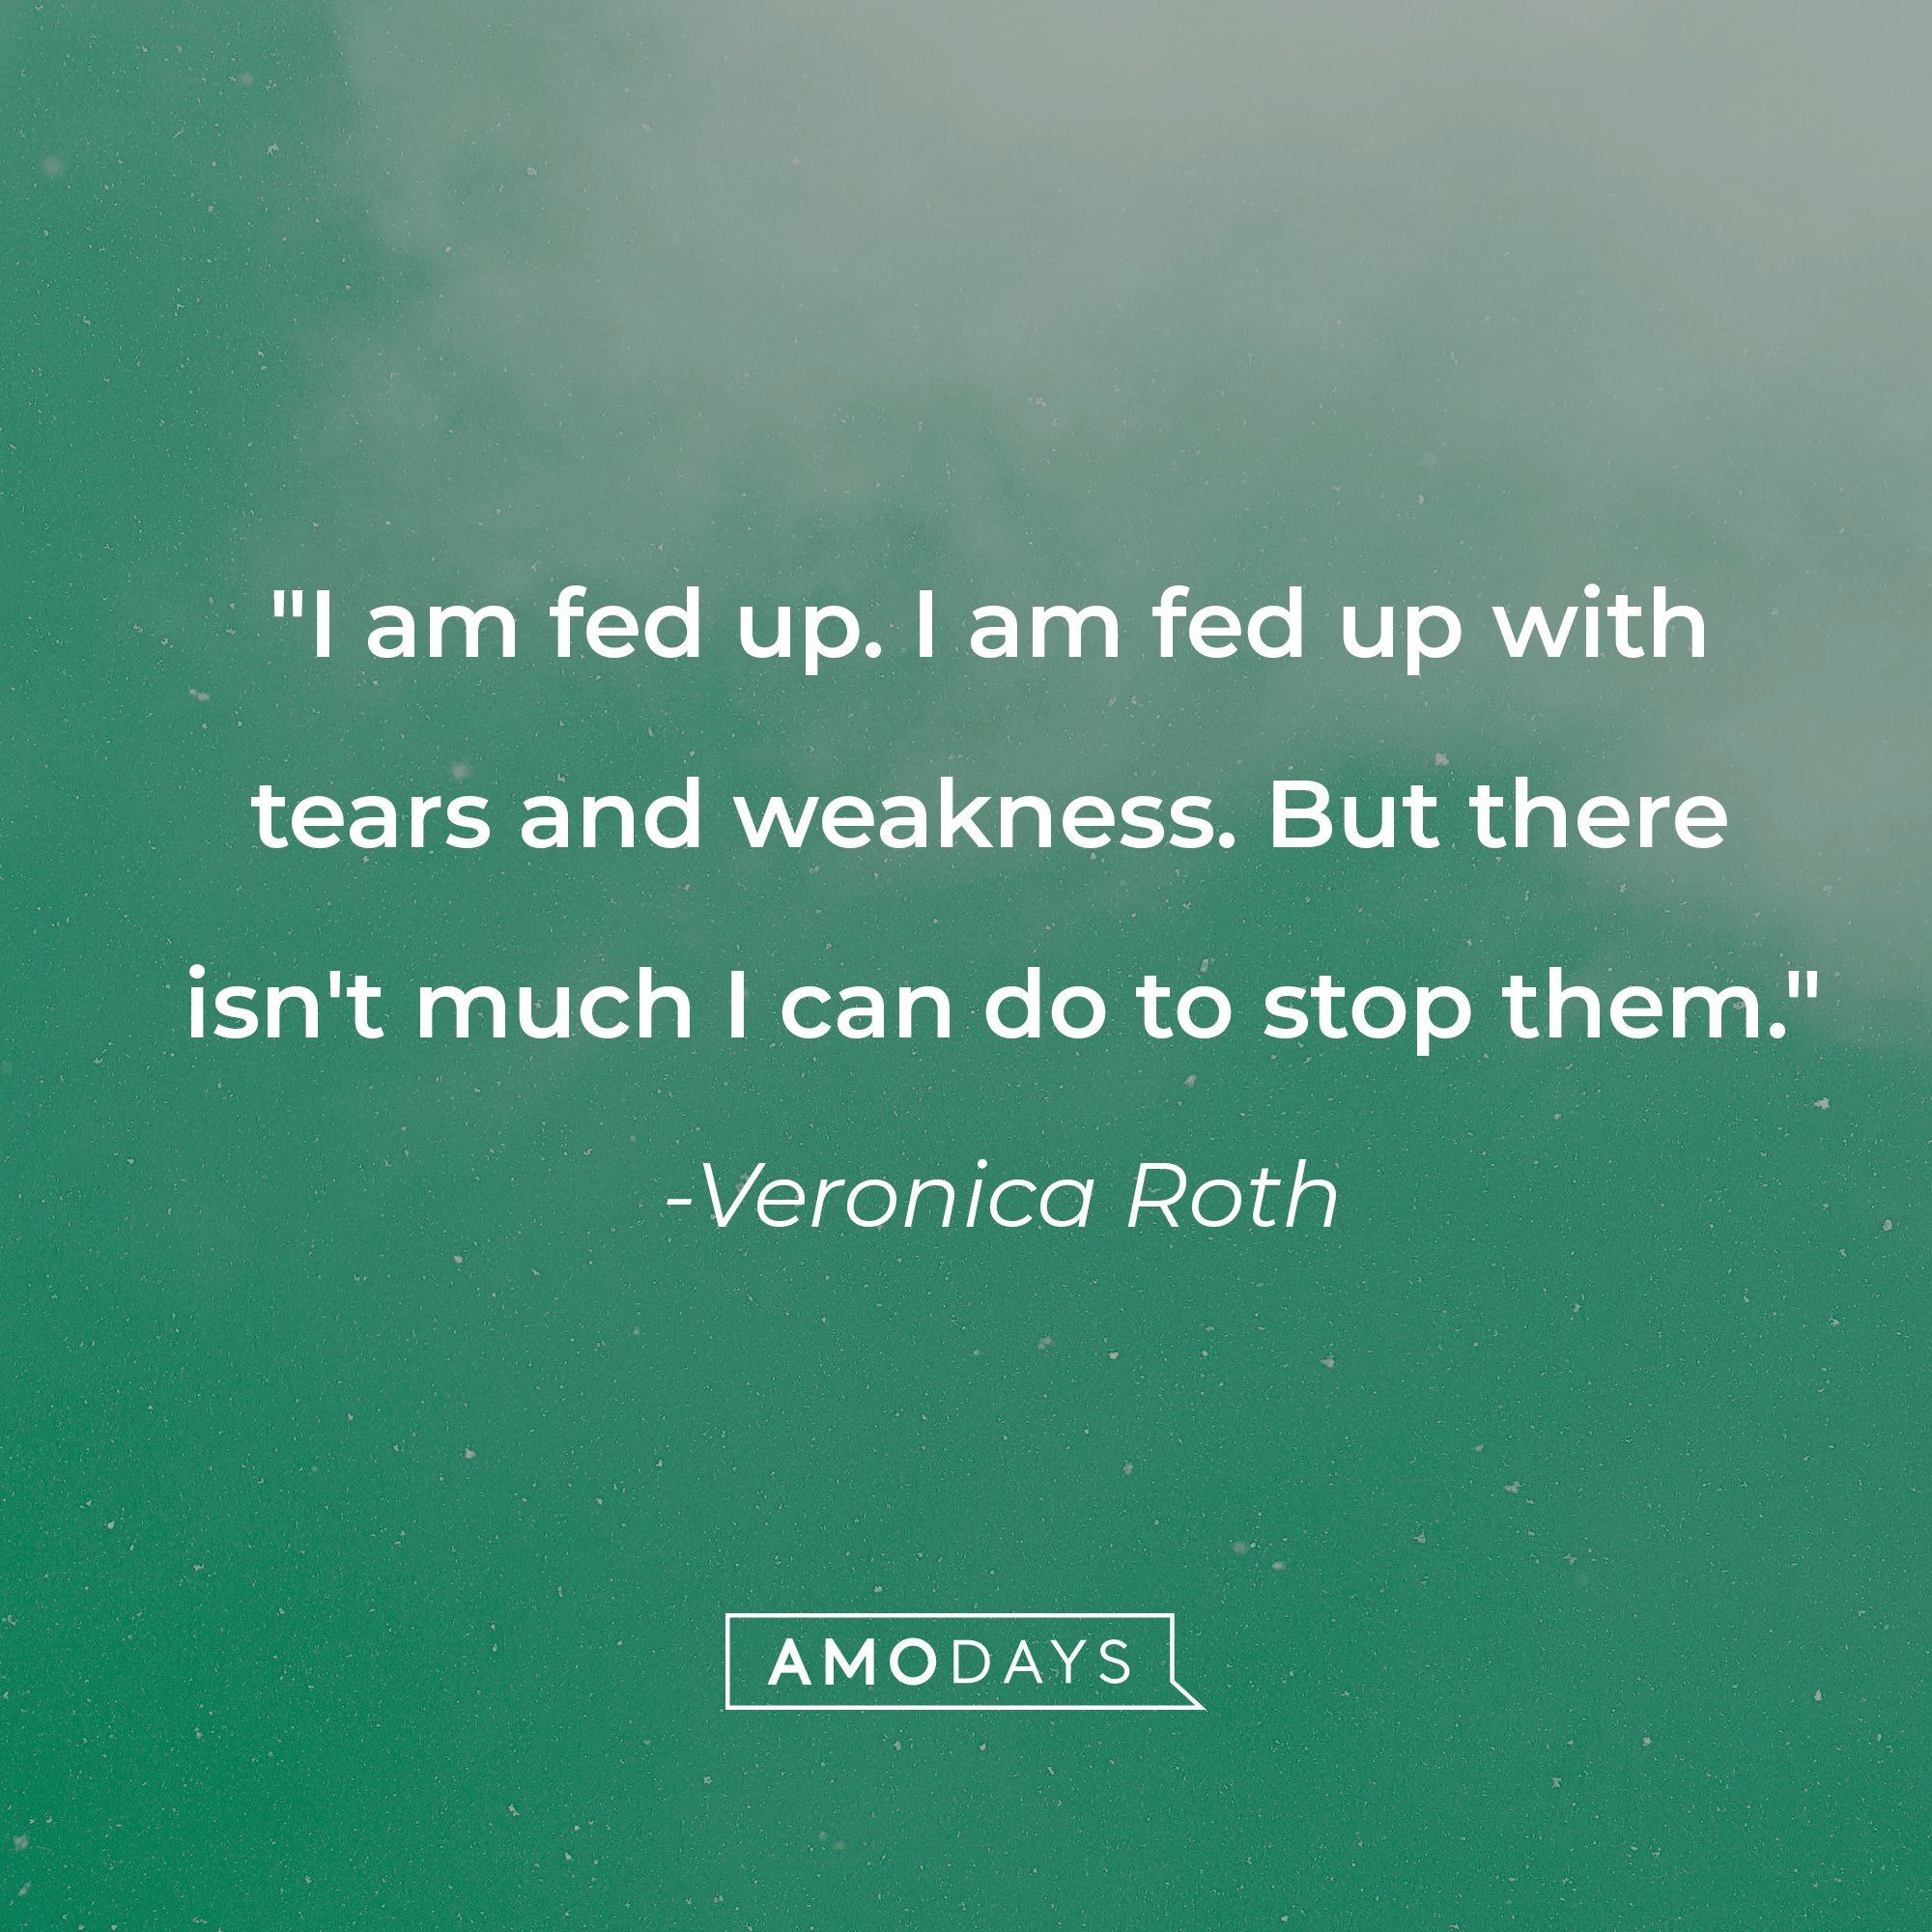 Veronica Roth's quote: "I am fed up. I am fed up with tears and weakness. But there isn't much I can do to stop them." | Source: AmoDays